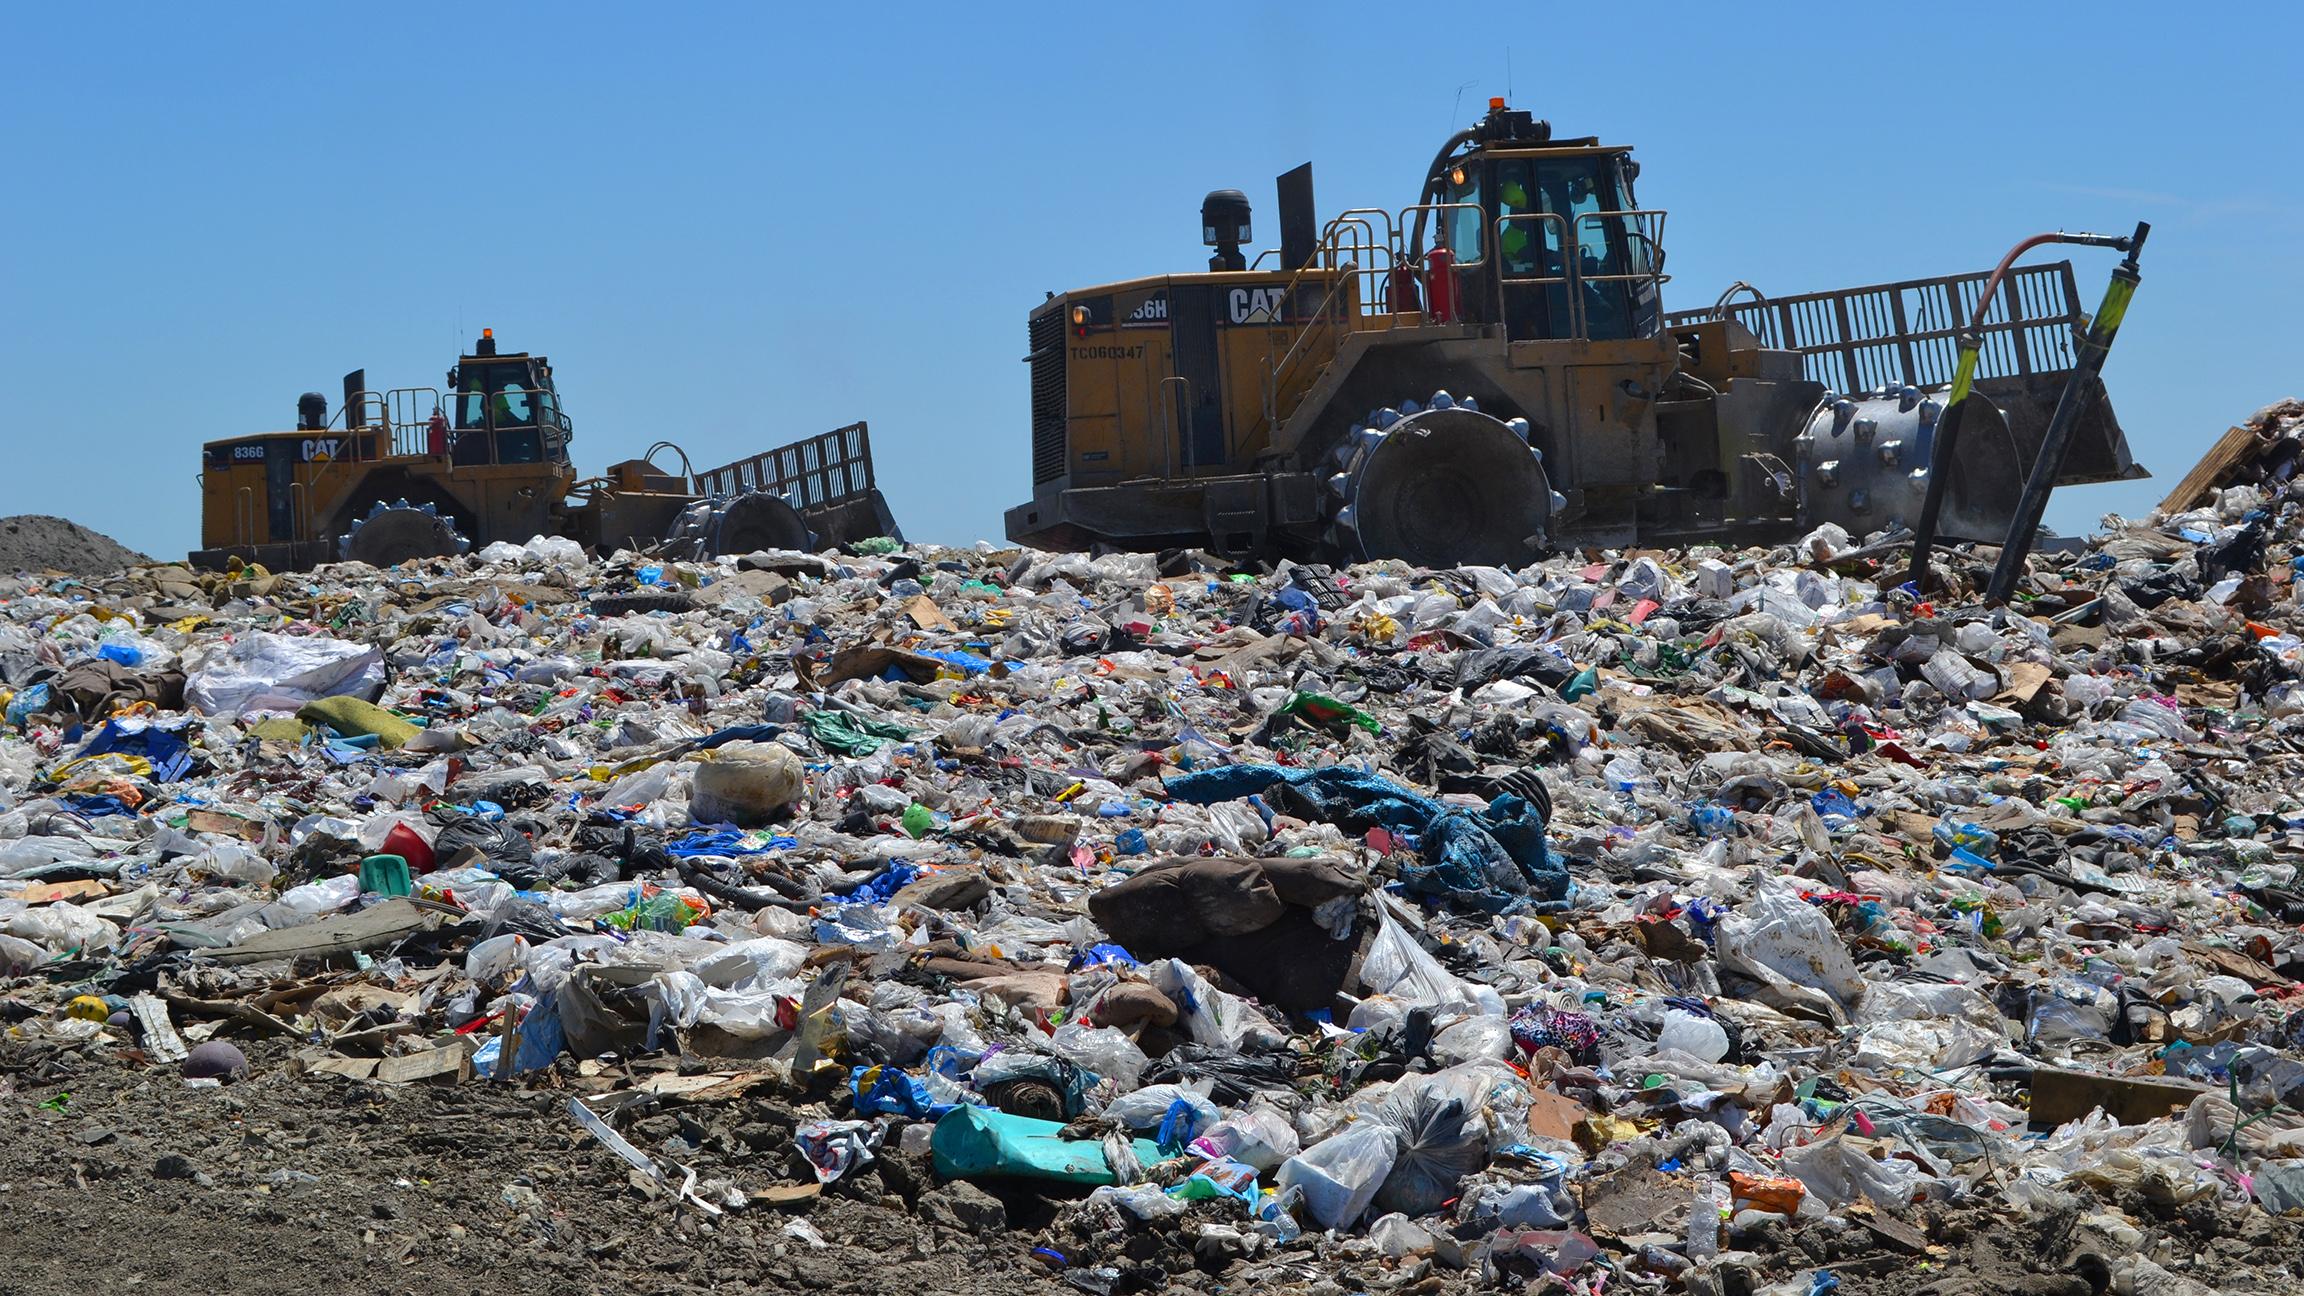 A landfill in Livingston County. Landfills account for nearly 20 percent of national emissions of methane, a greenhouse gas more harmful than carbon dioxide. (Chicago Tonight file photo)